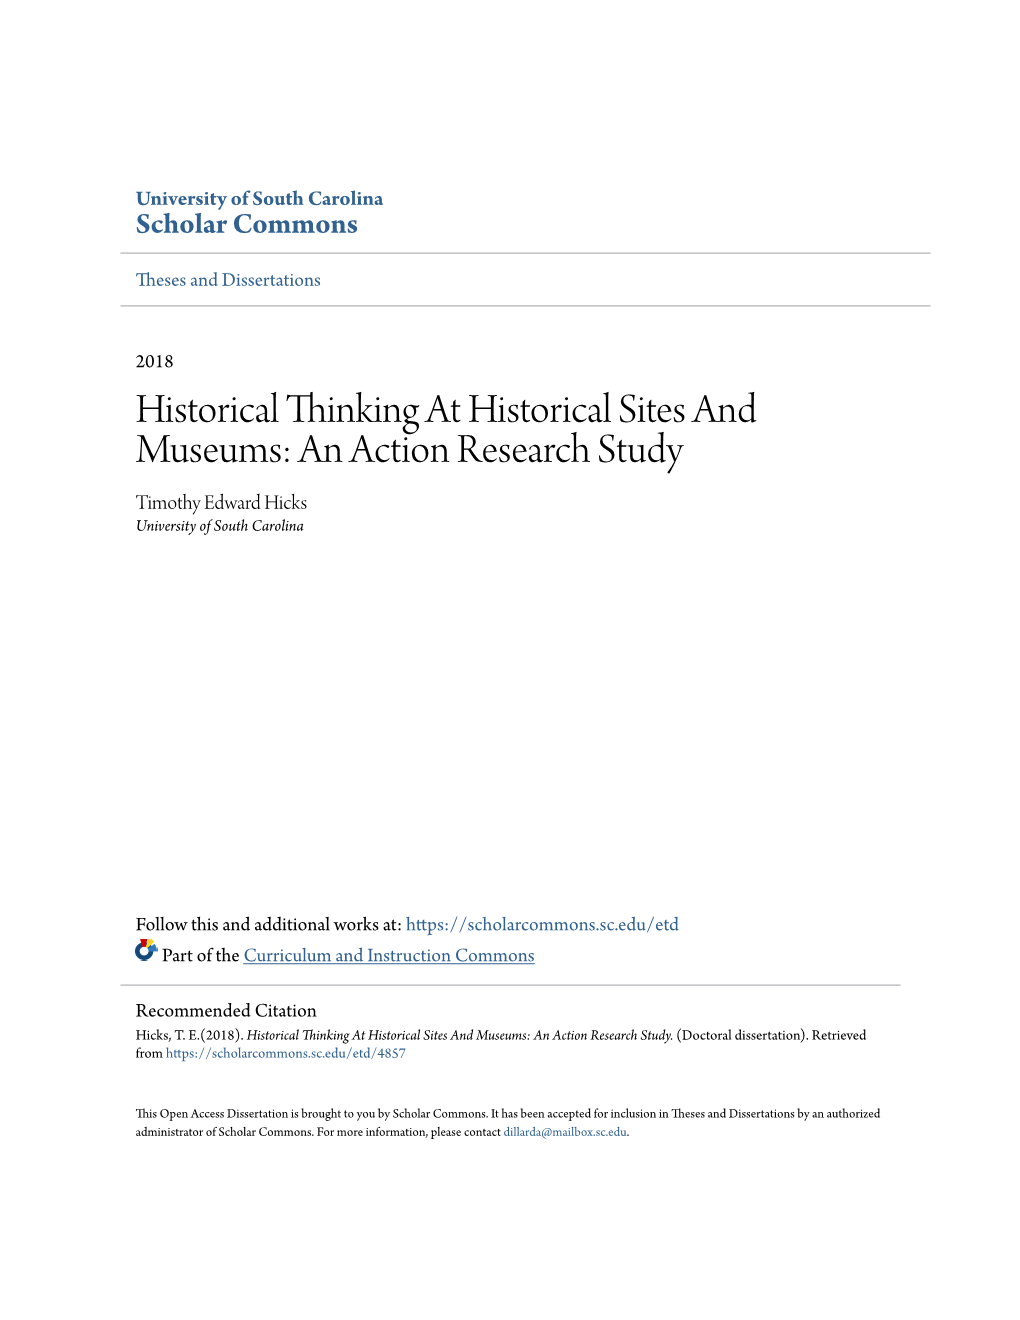 Historical Thinking at Historical Sites and Museums: an Action Research Study Timothy Edward Hicks University of South Carolina